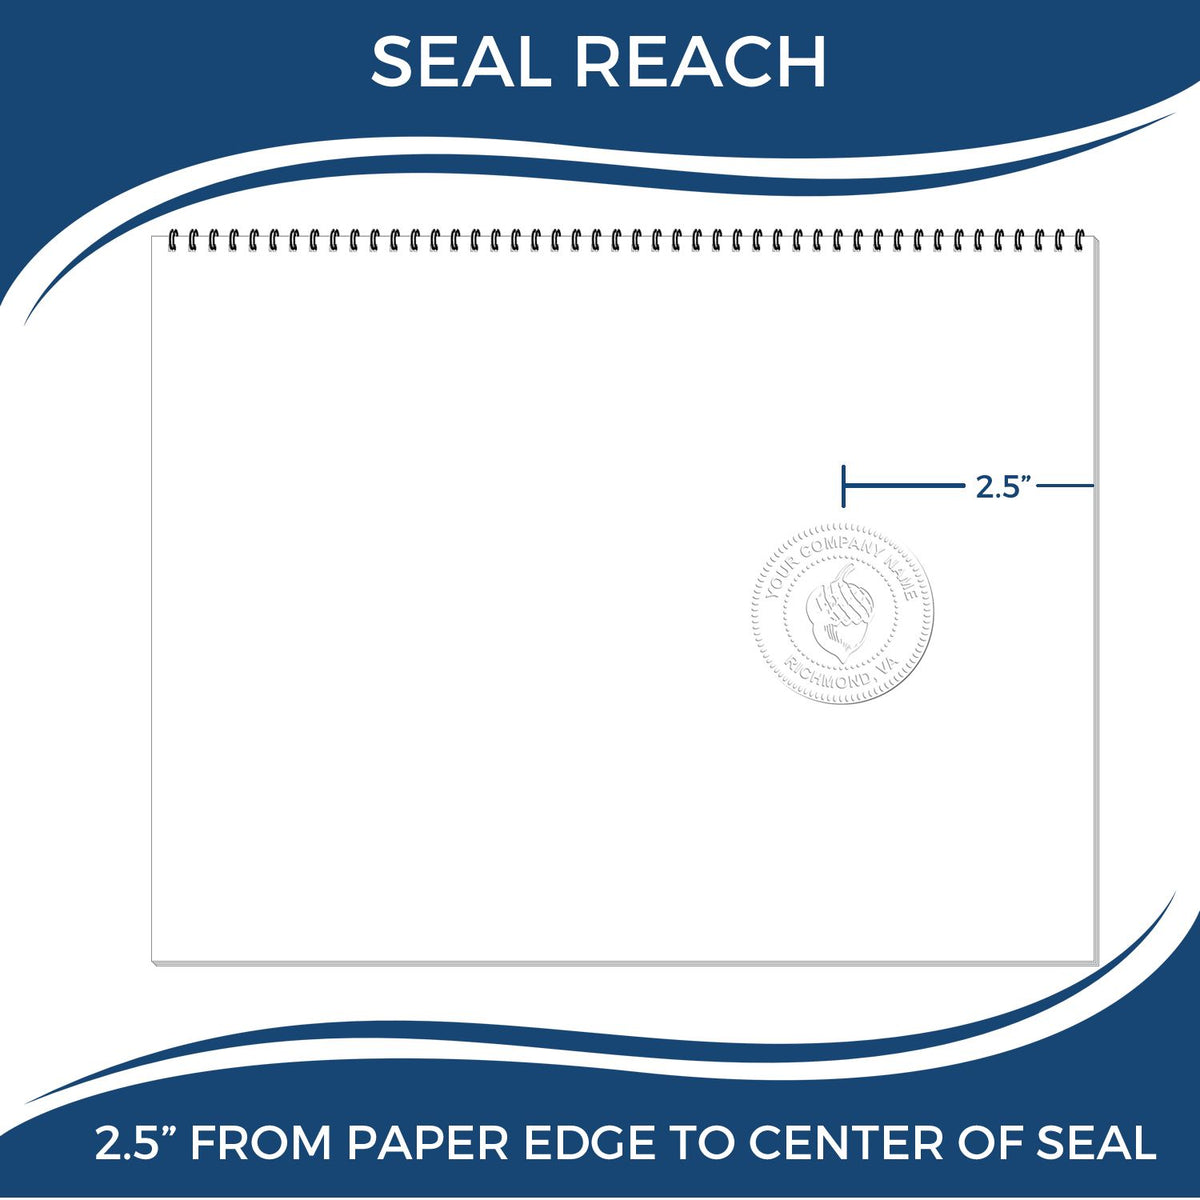 An infographic showing the seal reach which is represented by a ruler and a miniature seal image of the State of Rhode Island Long Reach Architectural Embossing Seal